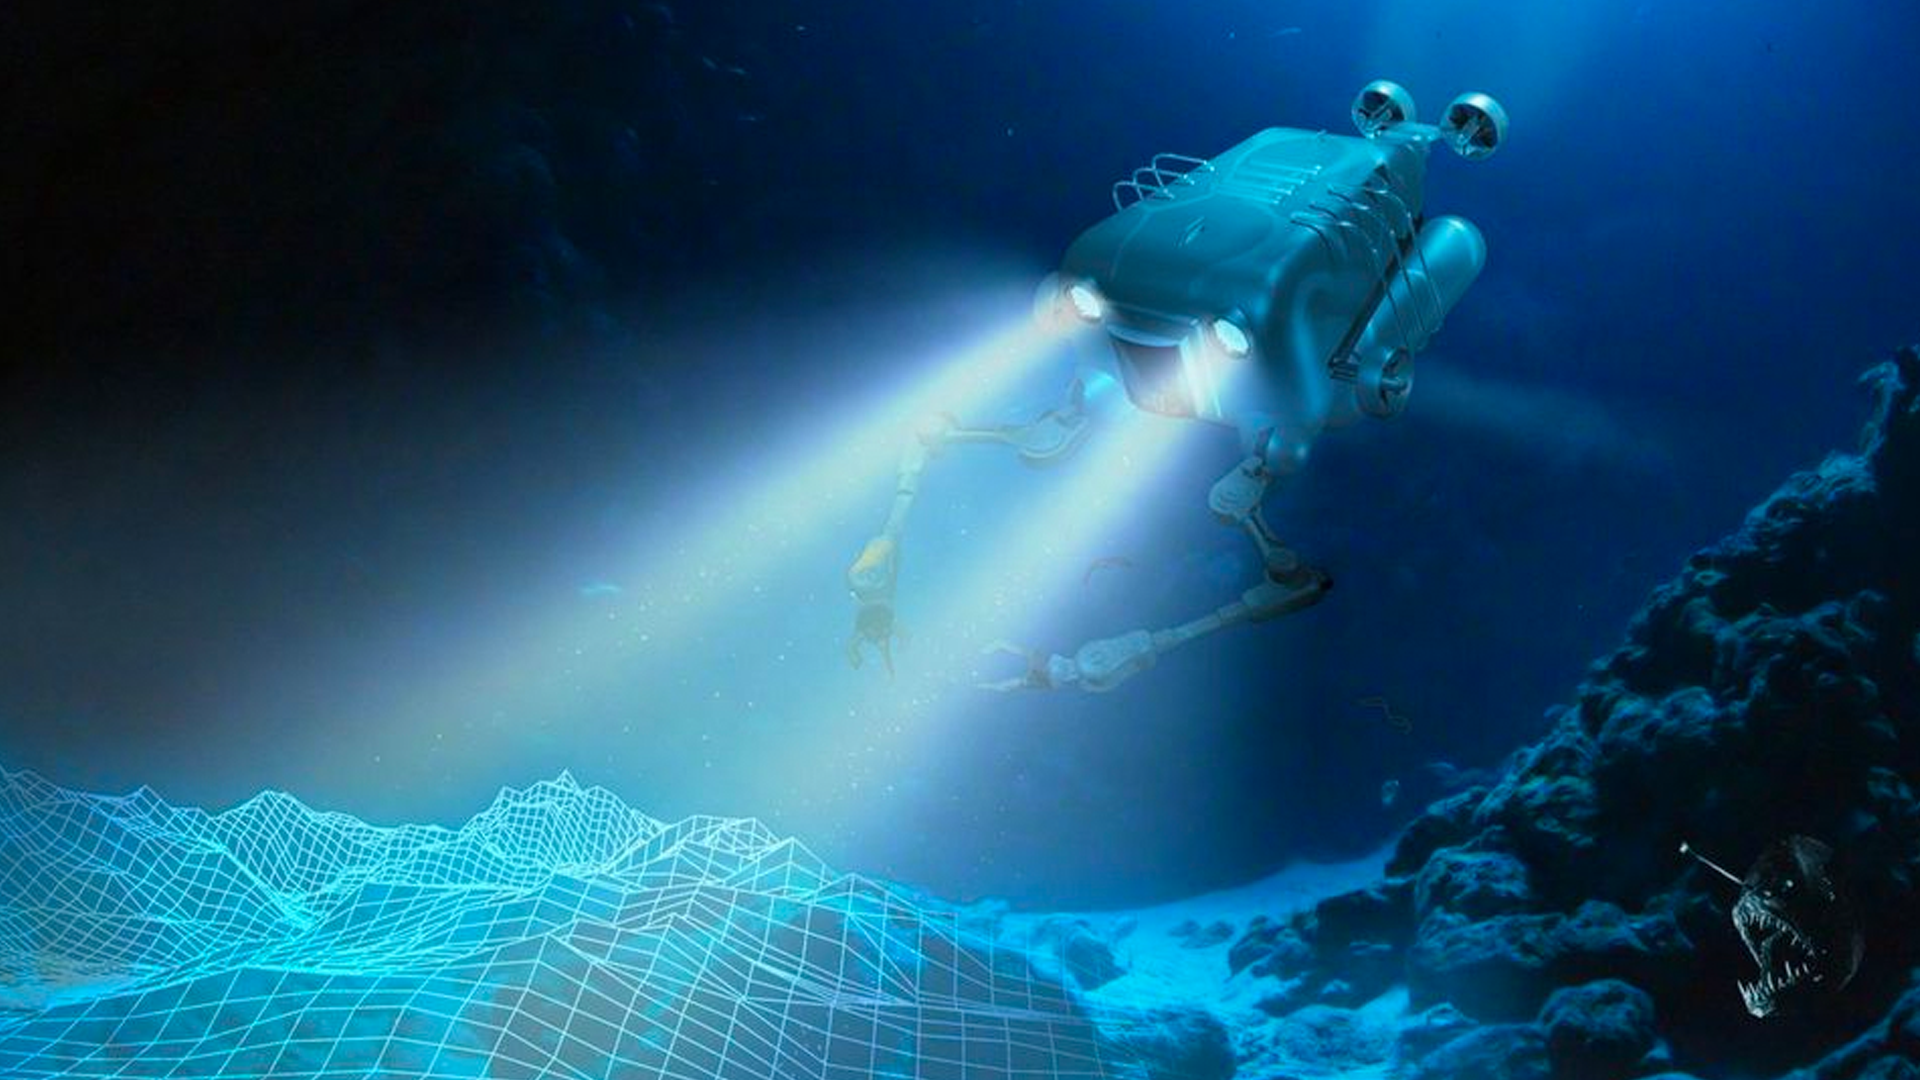 Artist rendering of an underwater AV with robotic arms, courtesy DARPA